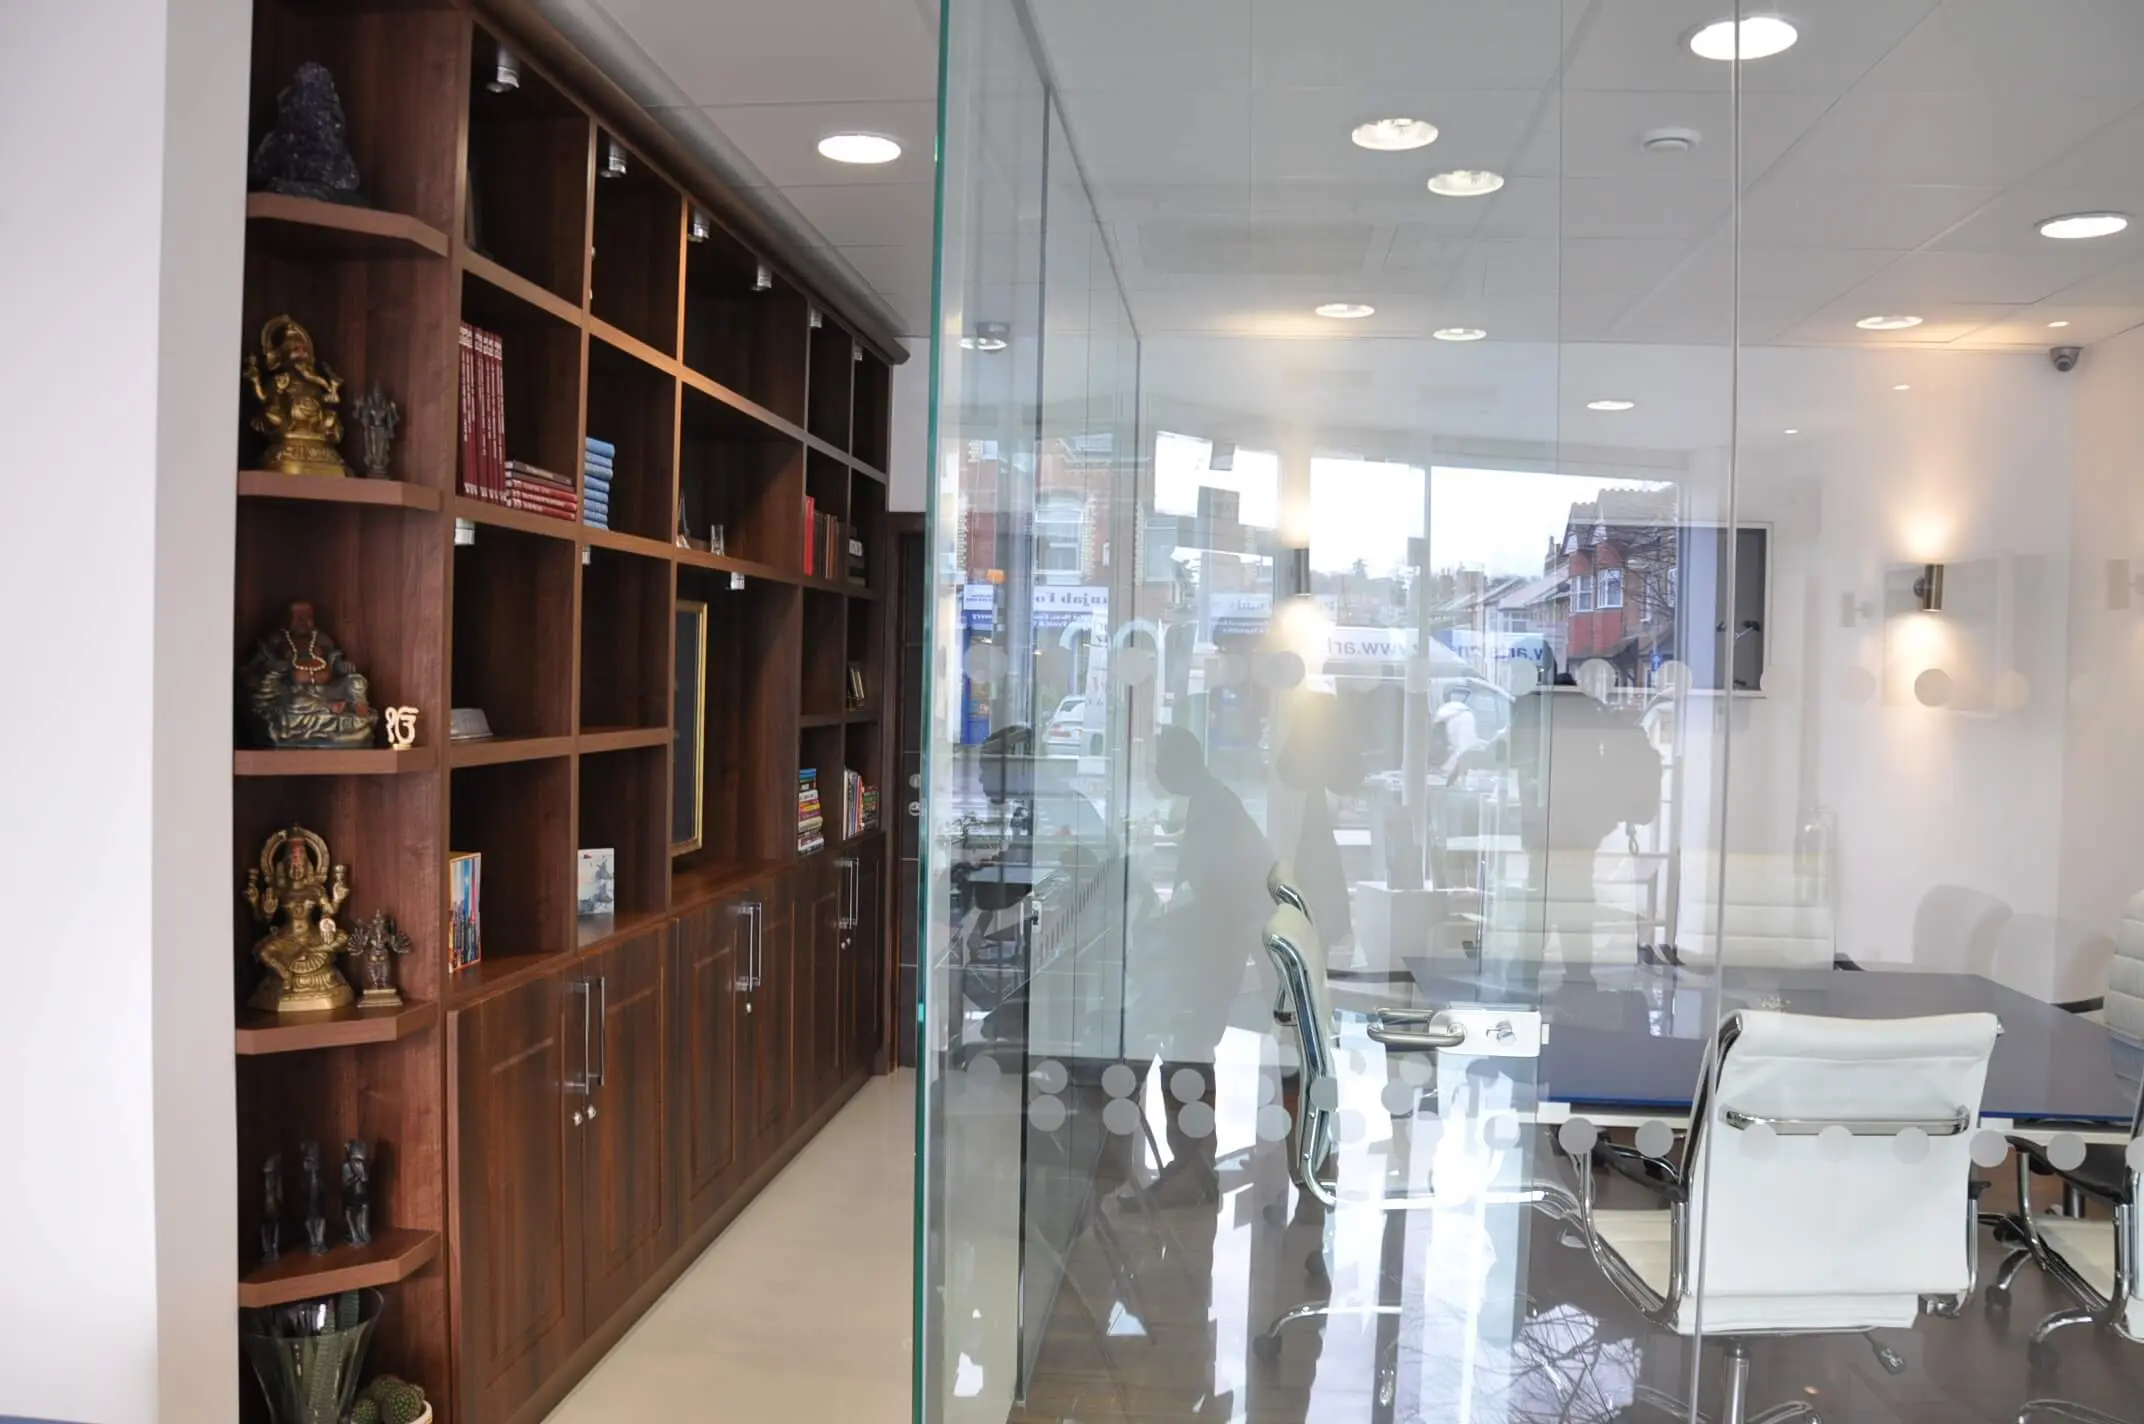 Office space with storage shelves and glass partitioned meeting room